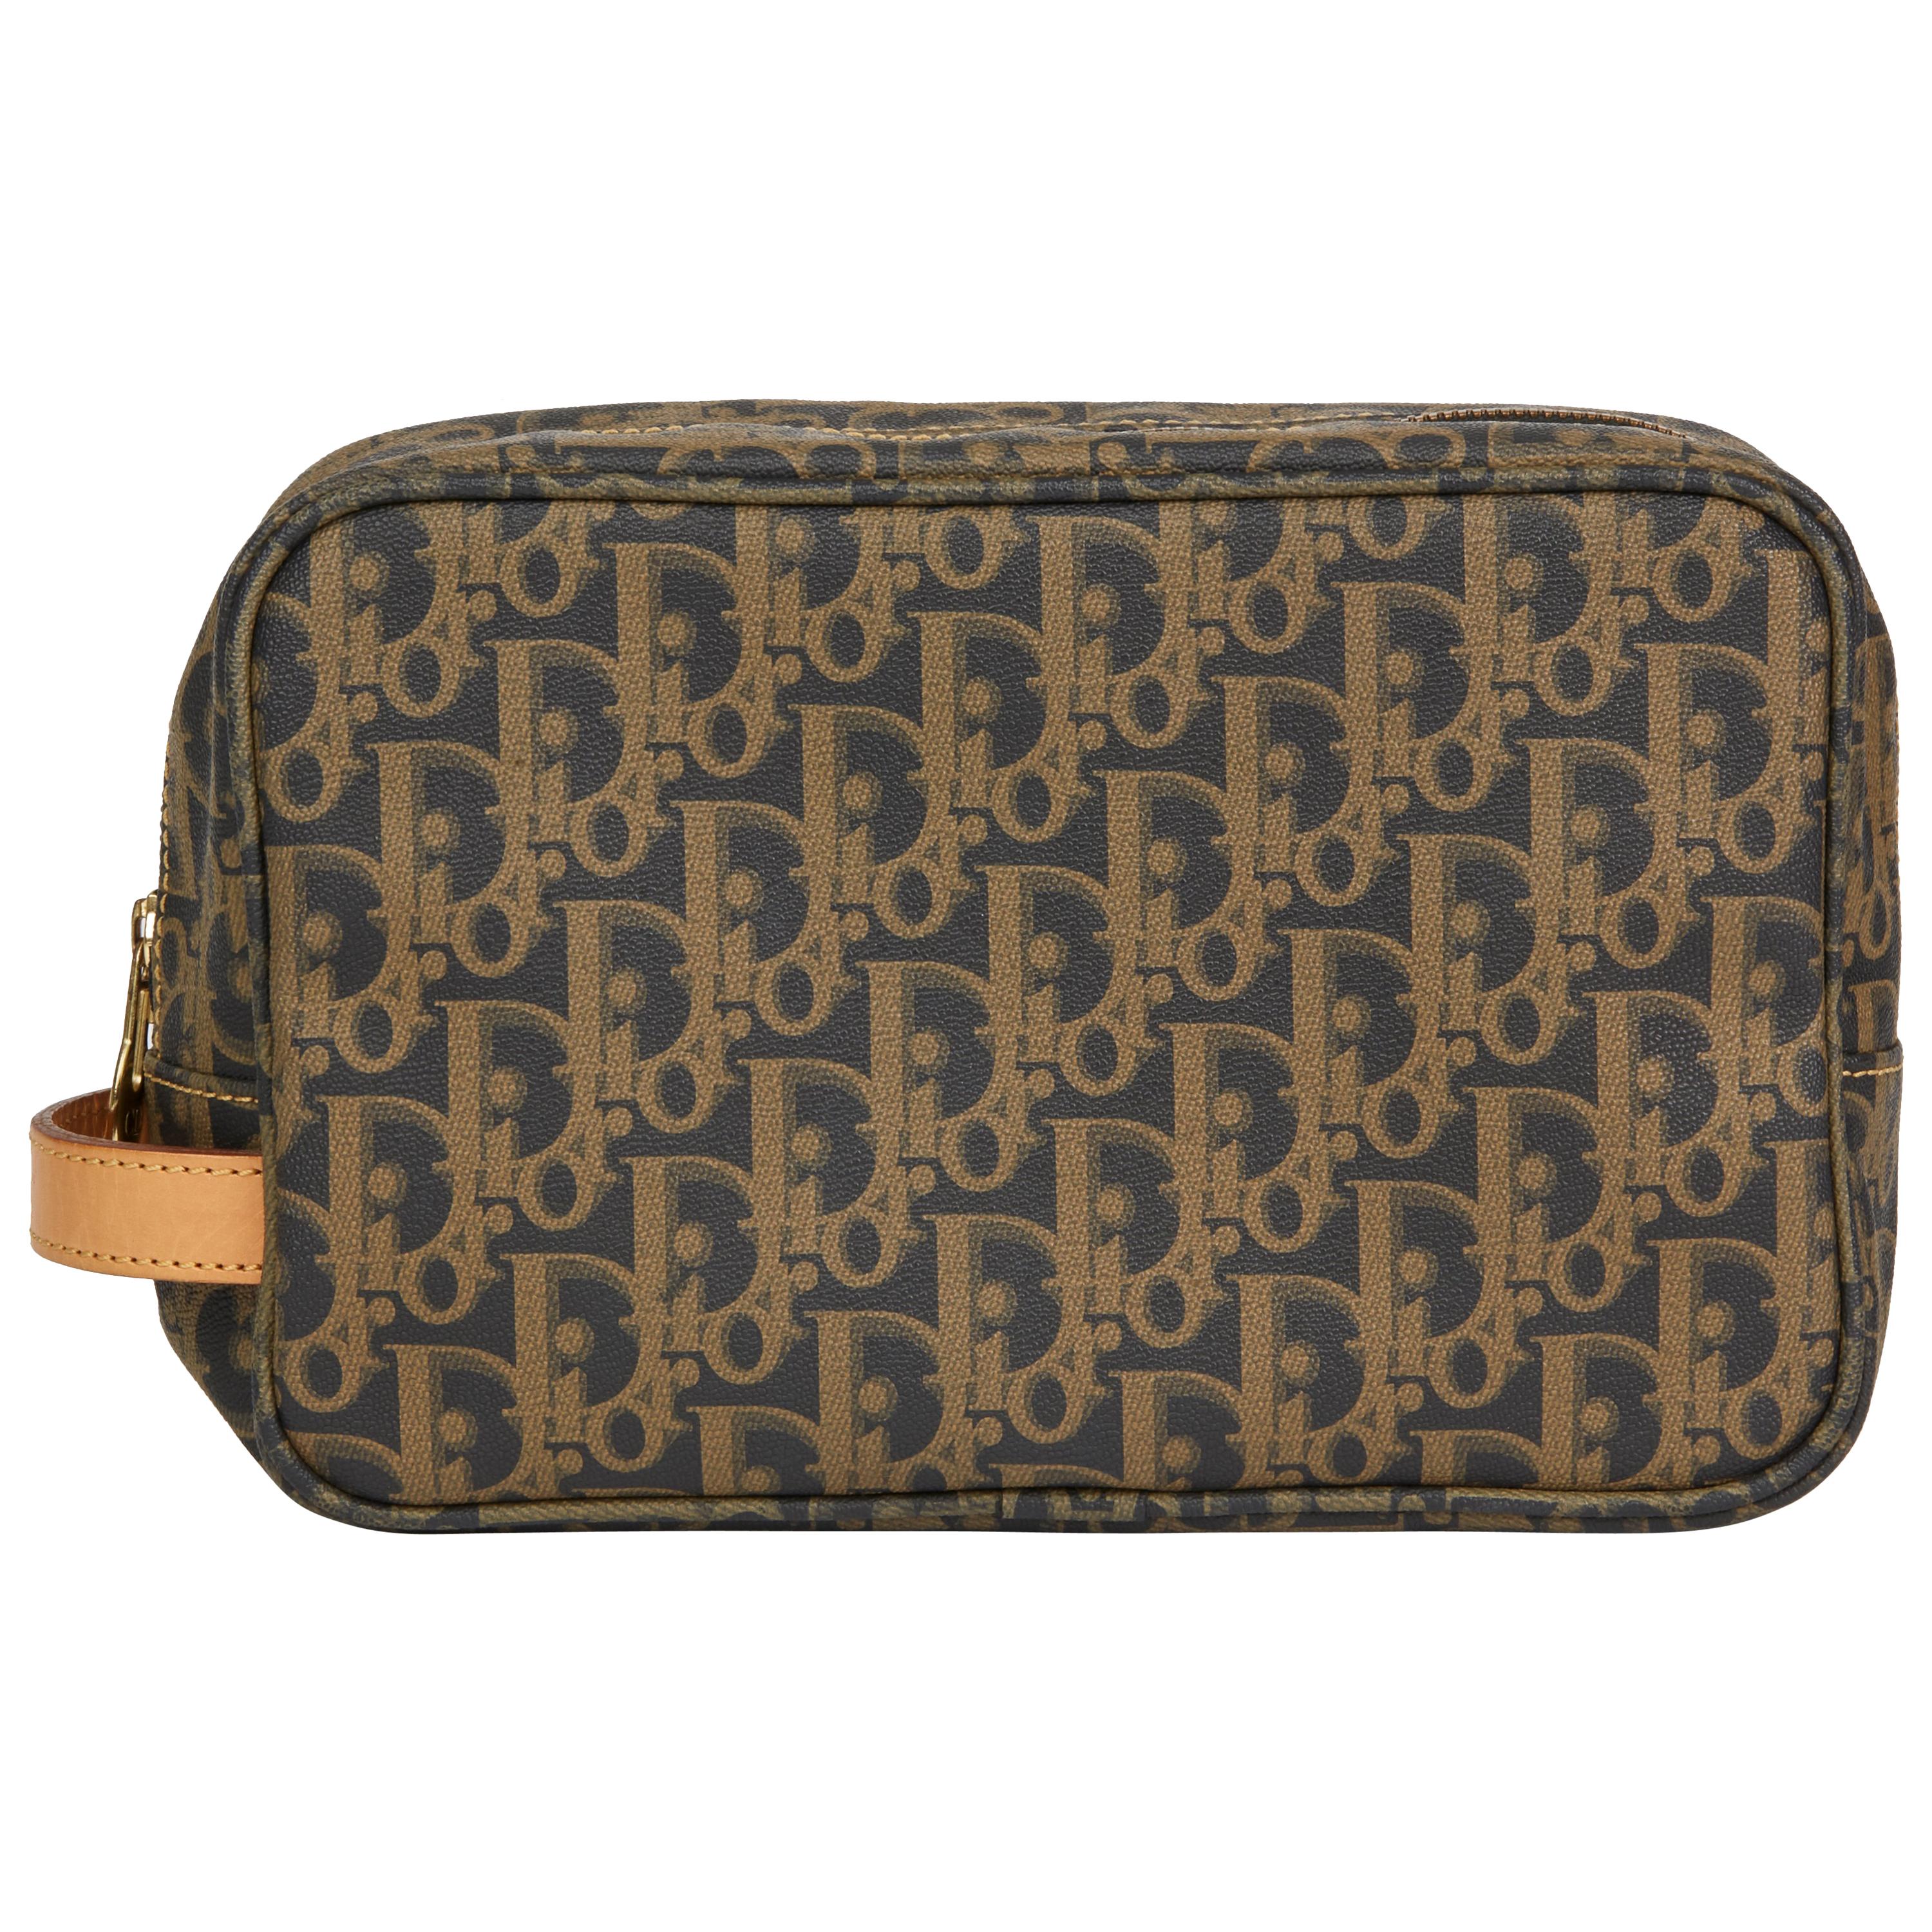 2000 Christian Dior Brown Monogram Coated Canvas Pouch